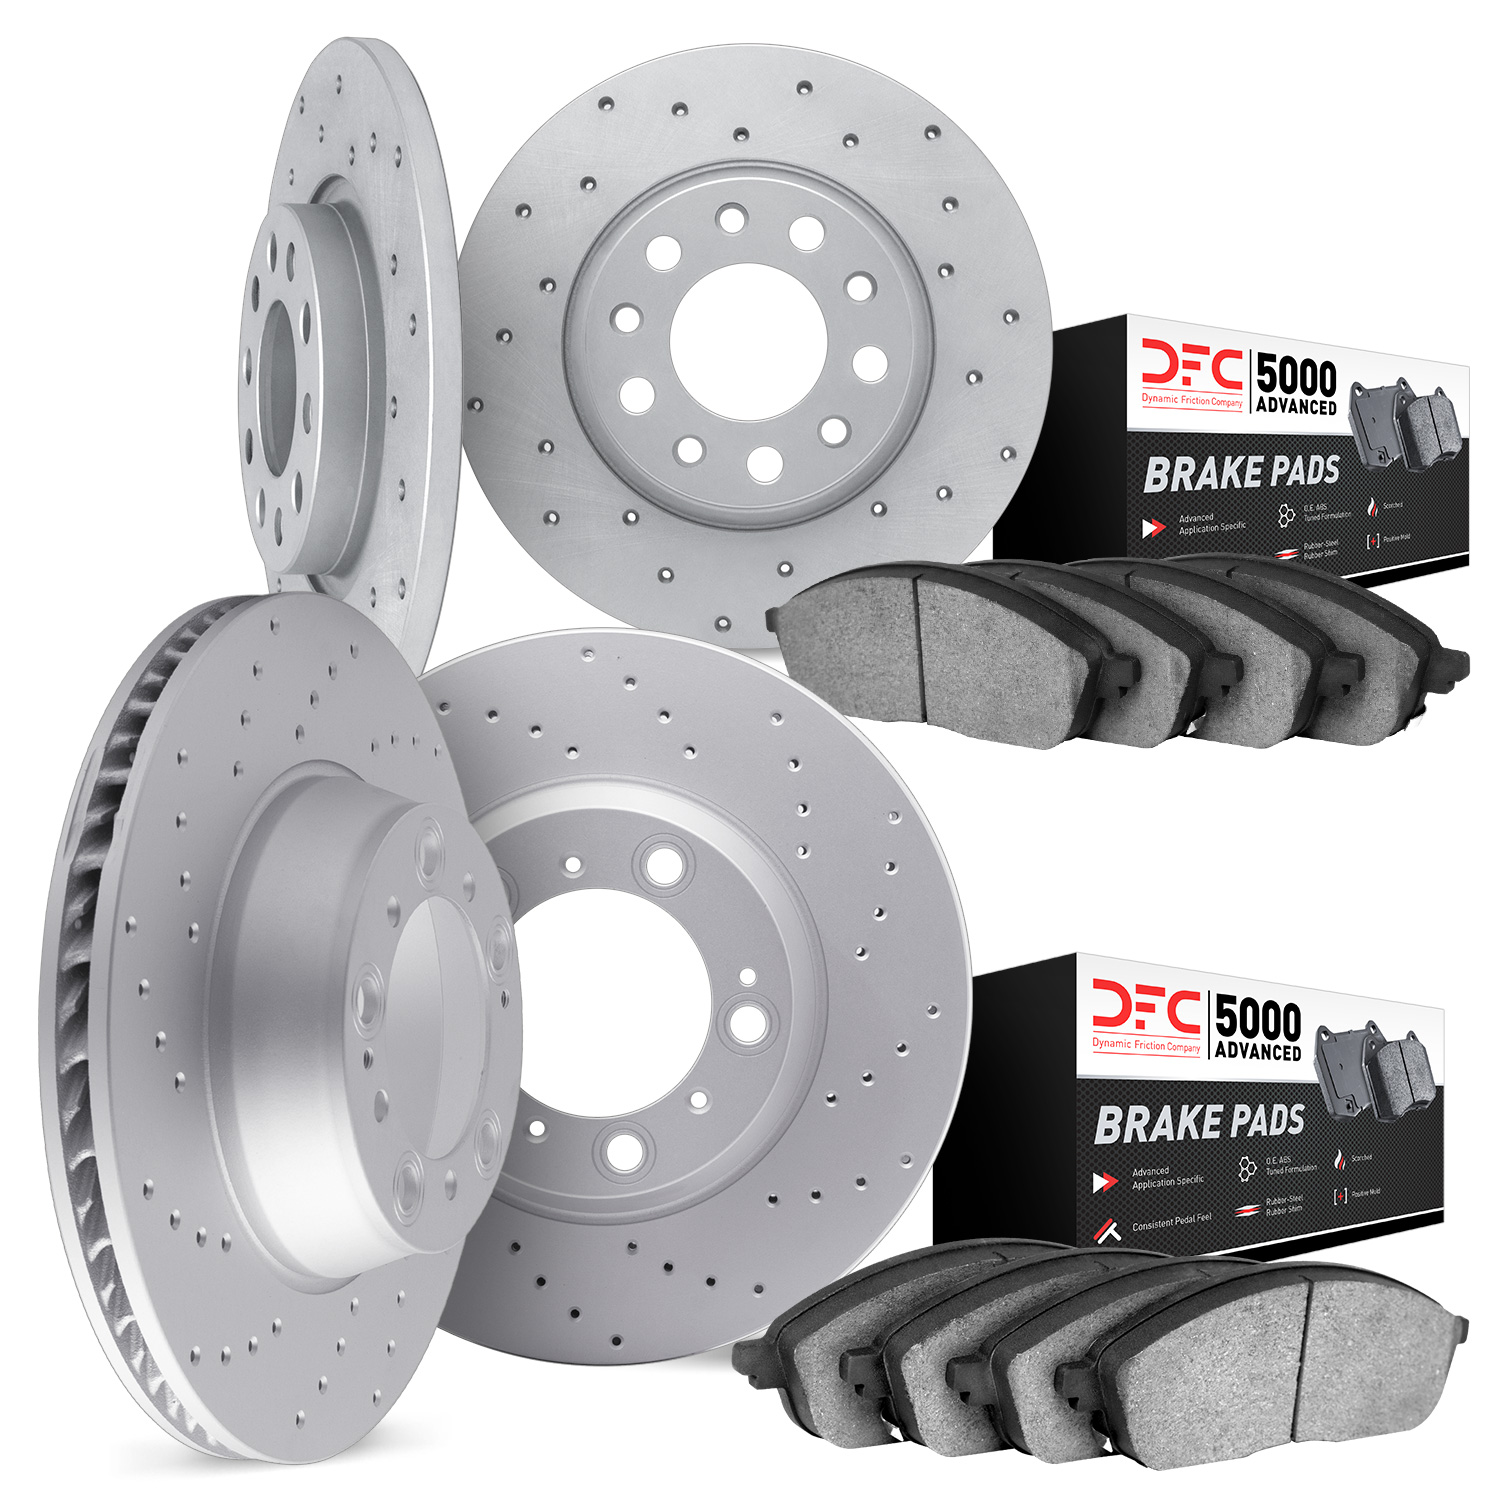 2704-13020 Geoperformance Drilled Brake Rotors with Active Performance Pads Kit, 2008-2010 Subaru, Position: Front and Rear